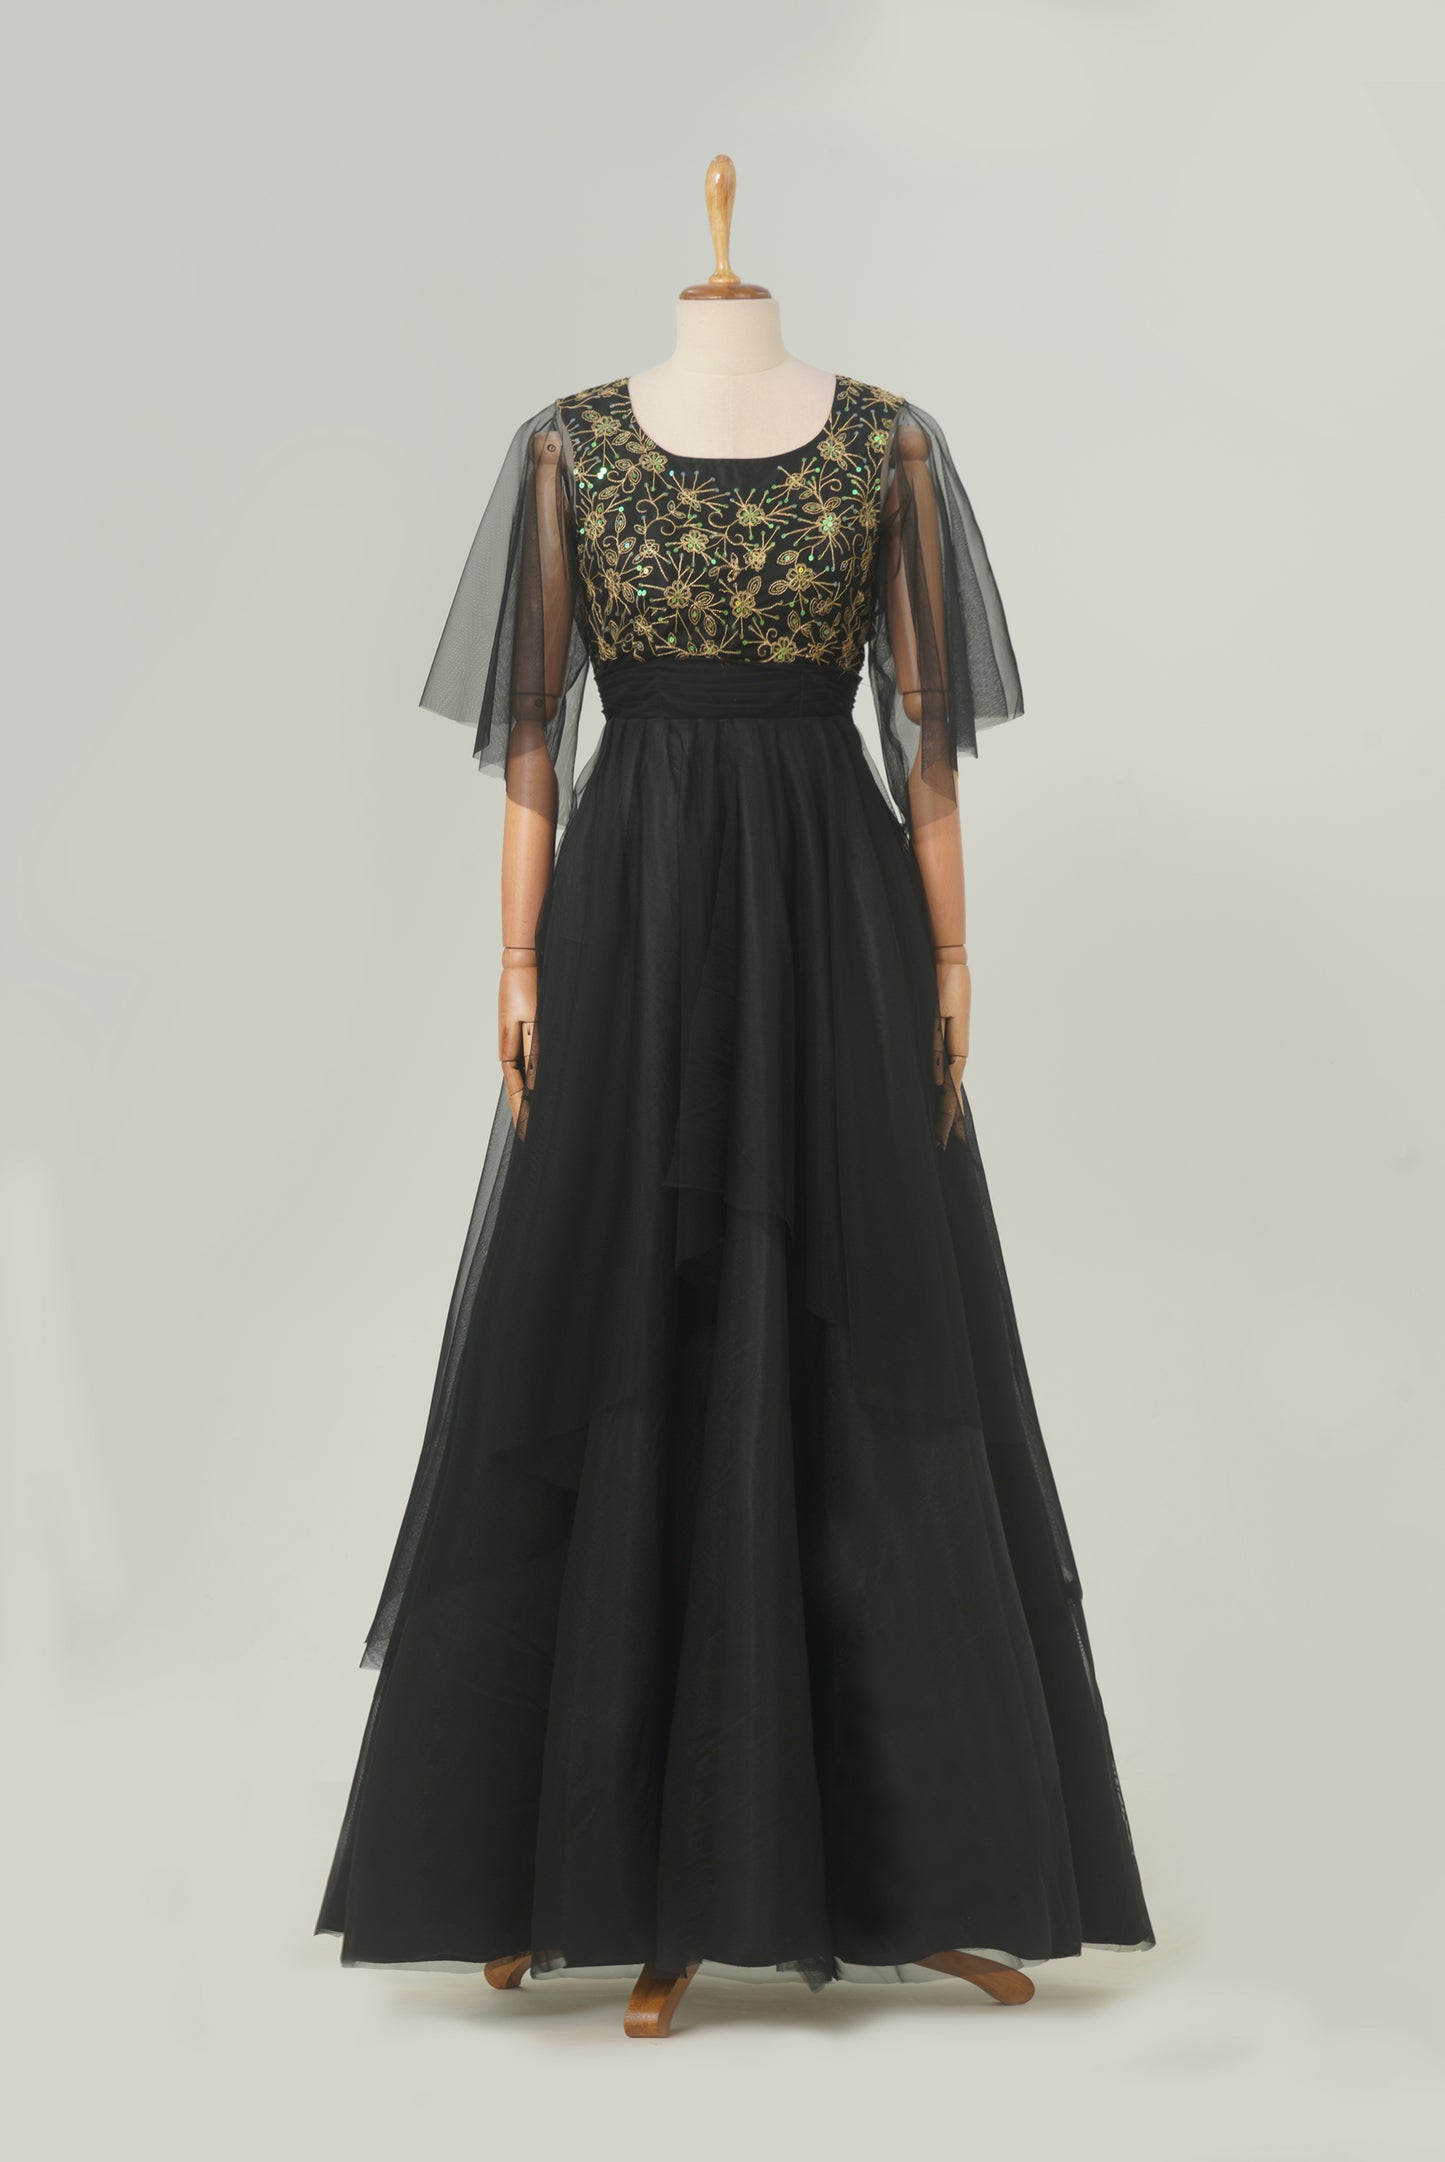 ZP004 Black Netted Gown with Embroidery Work